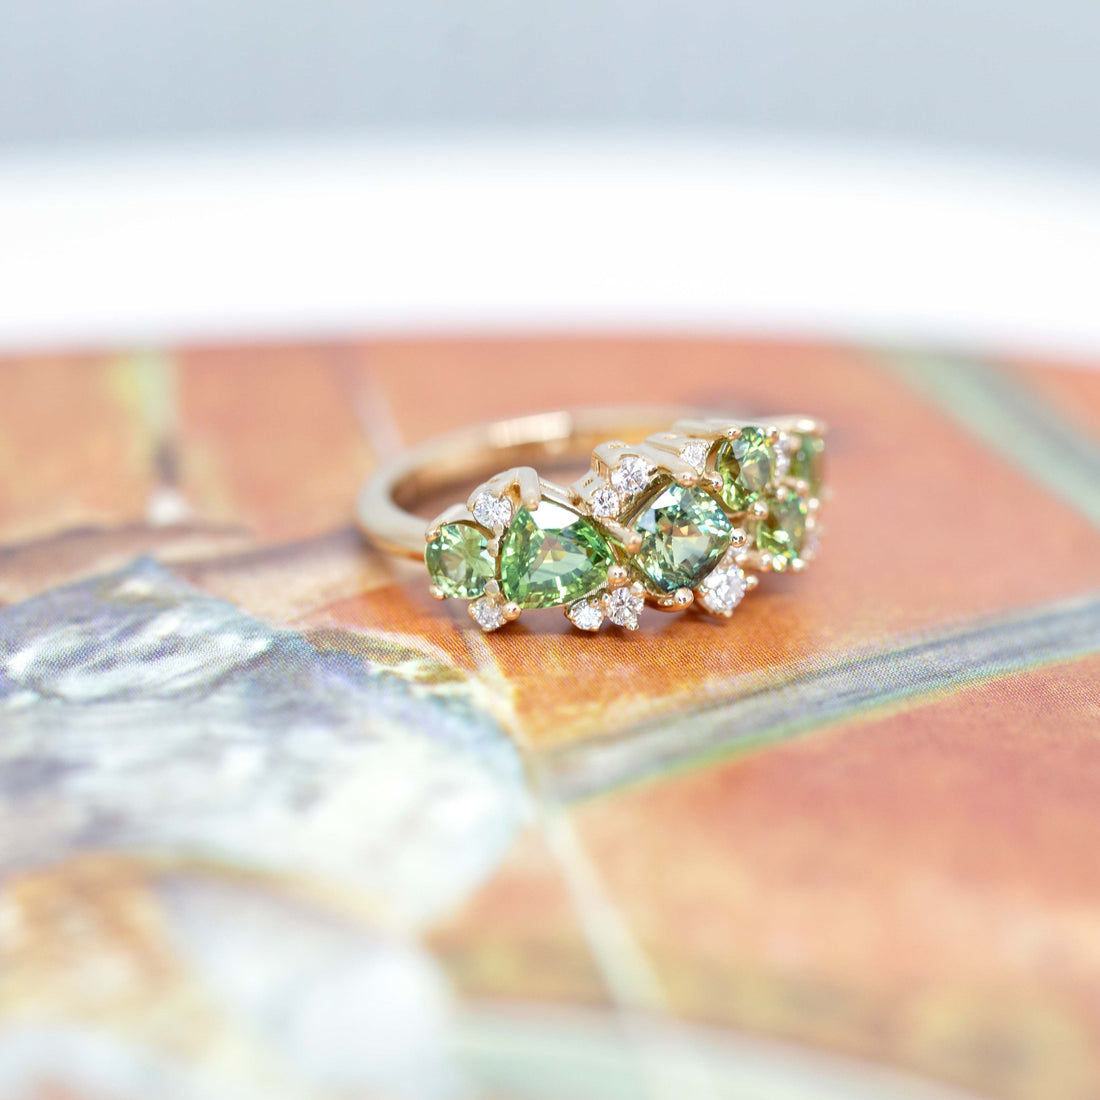 Vail Creek Jewelry Designs - Turlock's Home for Fine Jewelry, Diamonds &  Engagement Rings